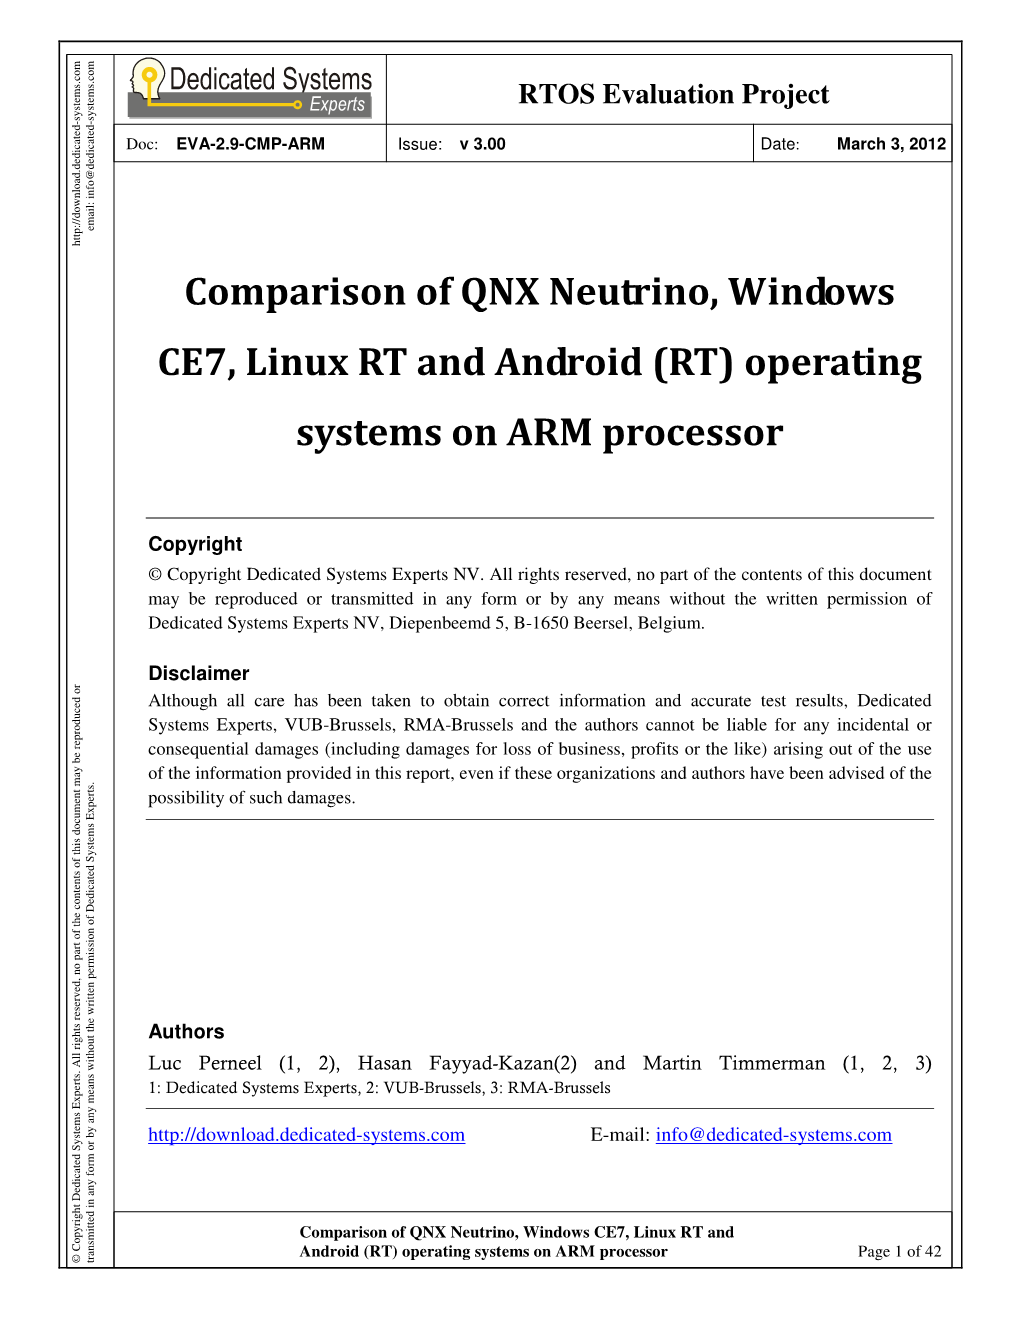 Comparison of QNX Neutrino, Windows CE7, Linux RT and Android (RT) Operating Systems on ARM Processor